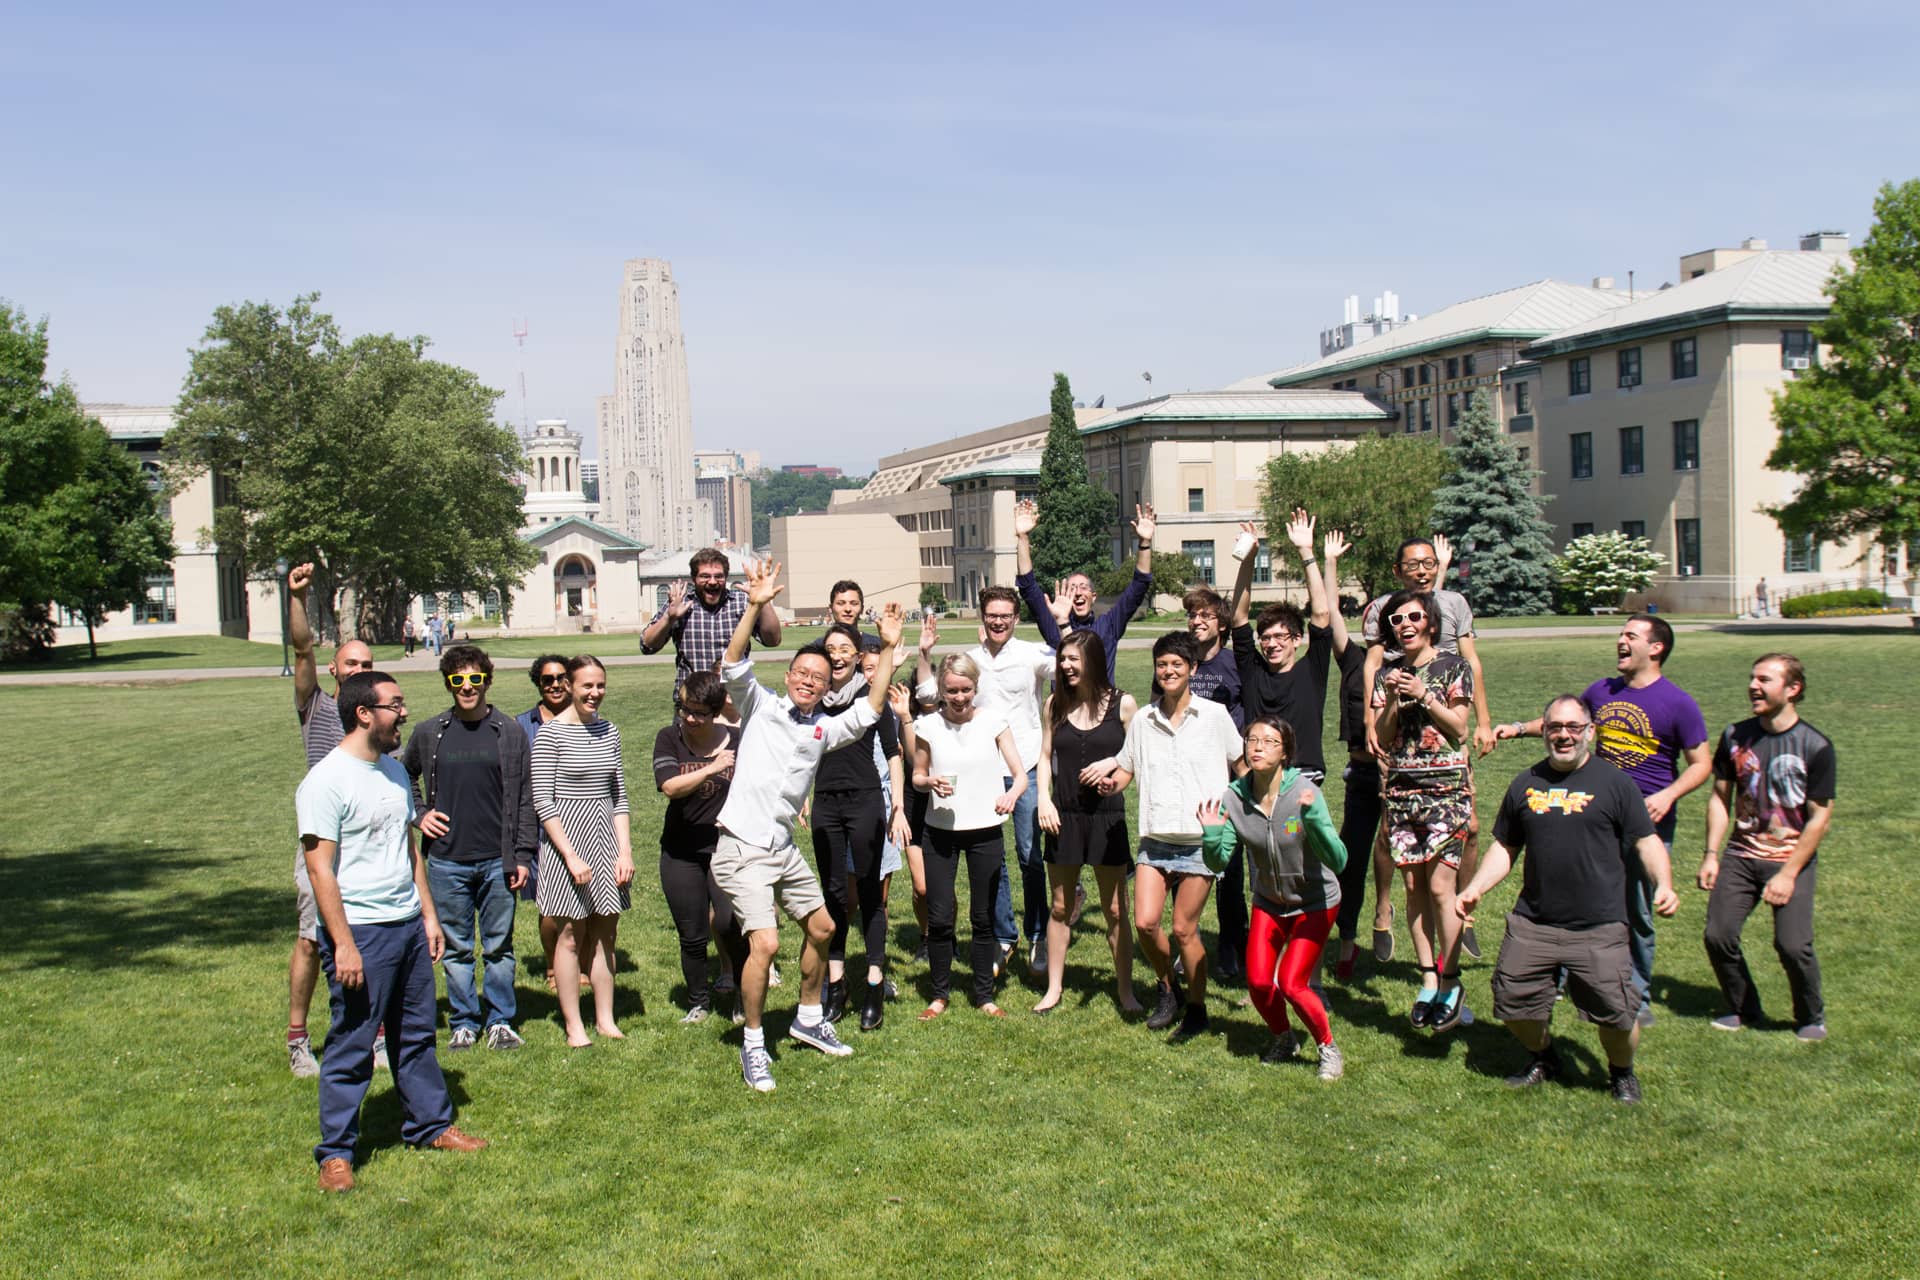 Participants jump, smile and throw their hands in the air on a green lawn"